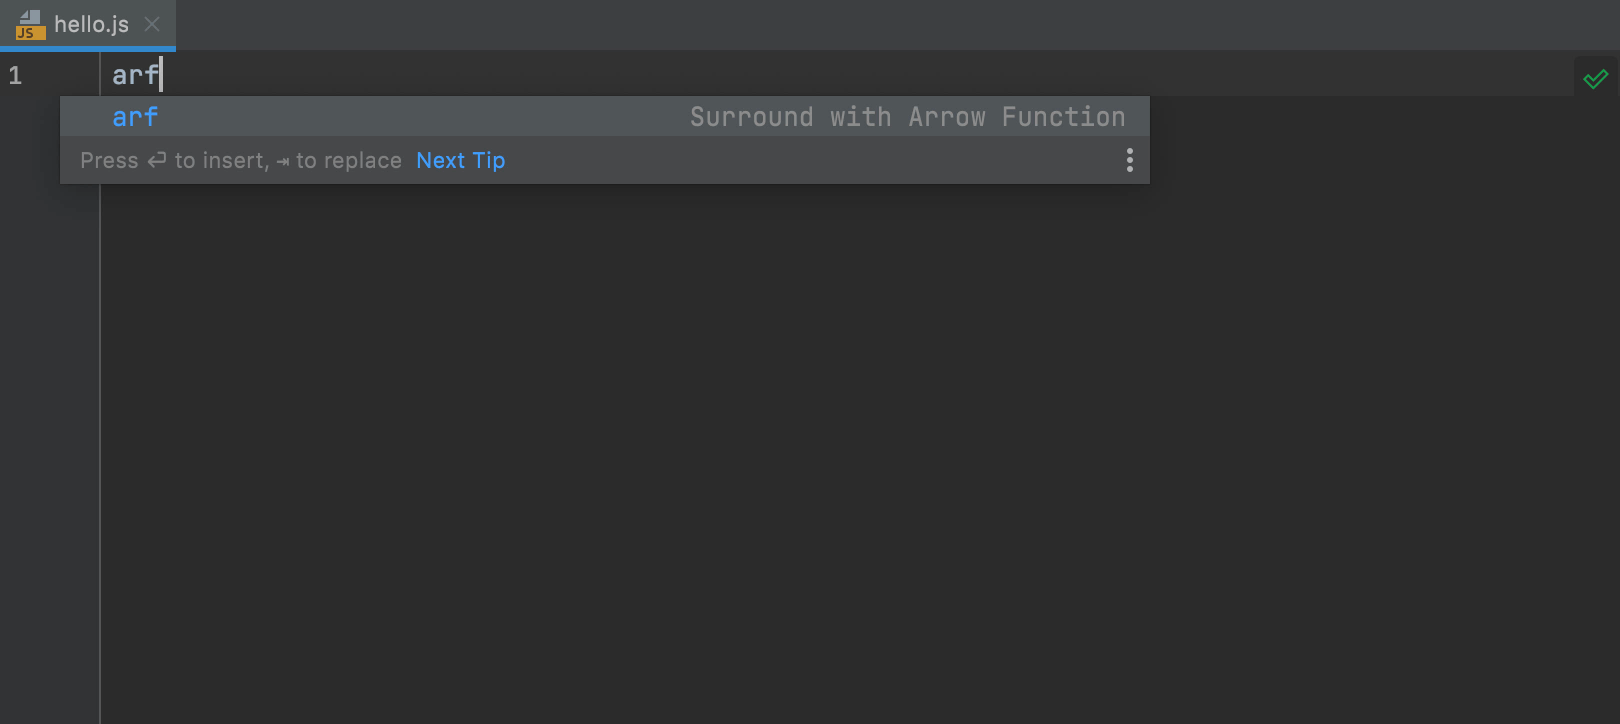 New action for arrow functions